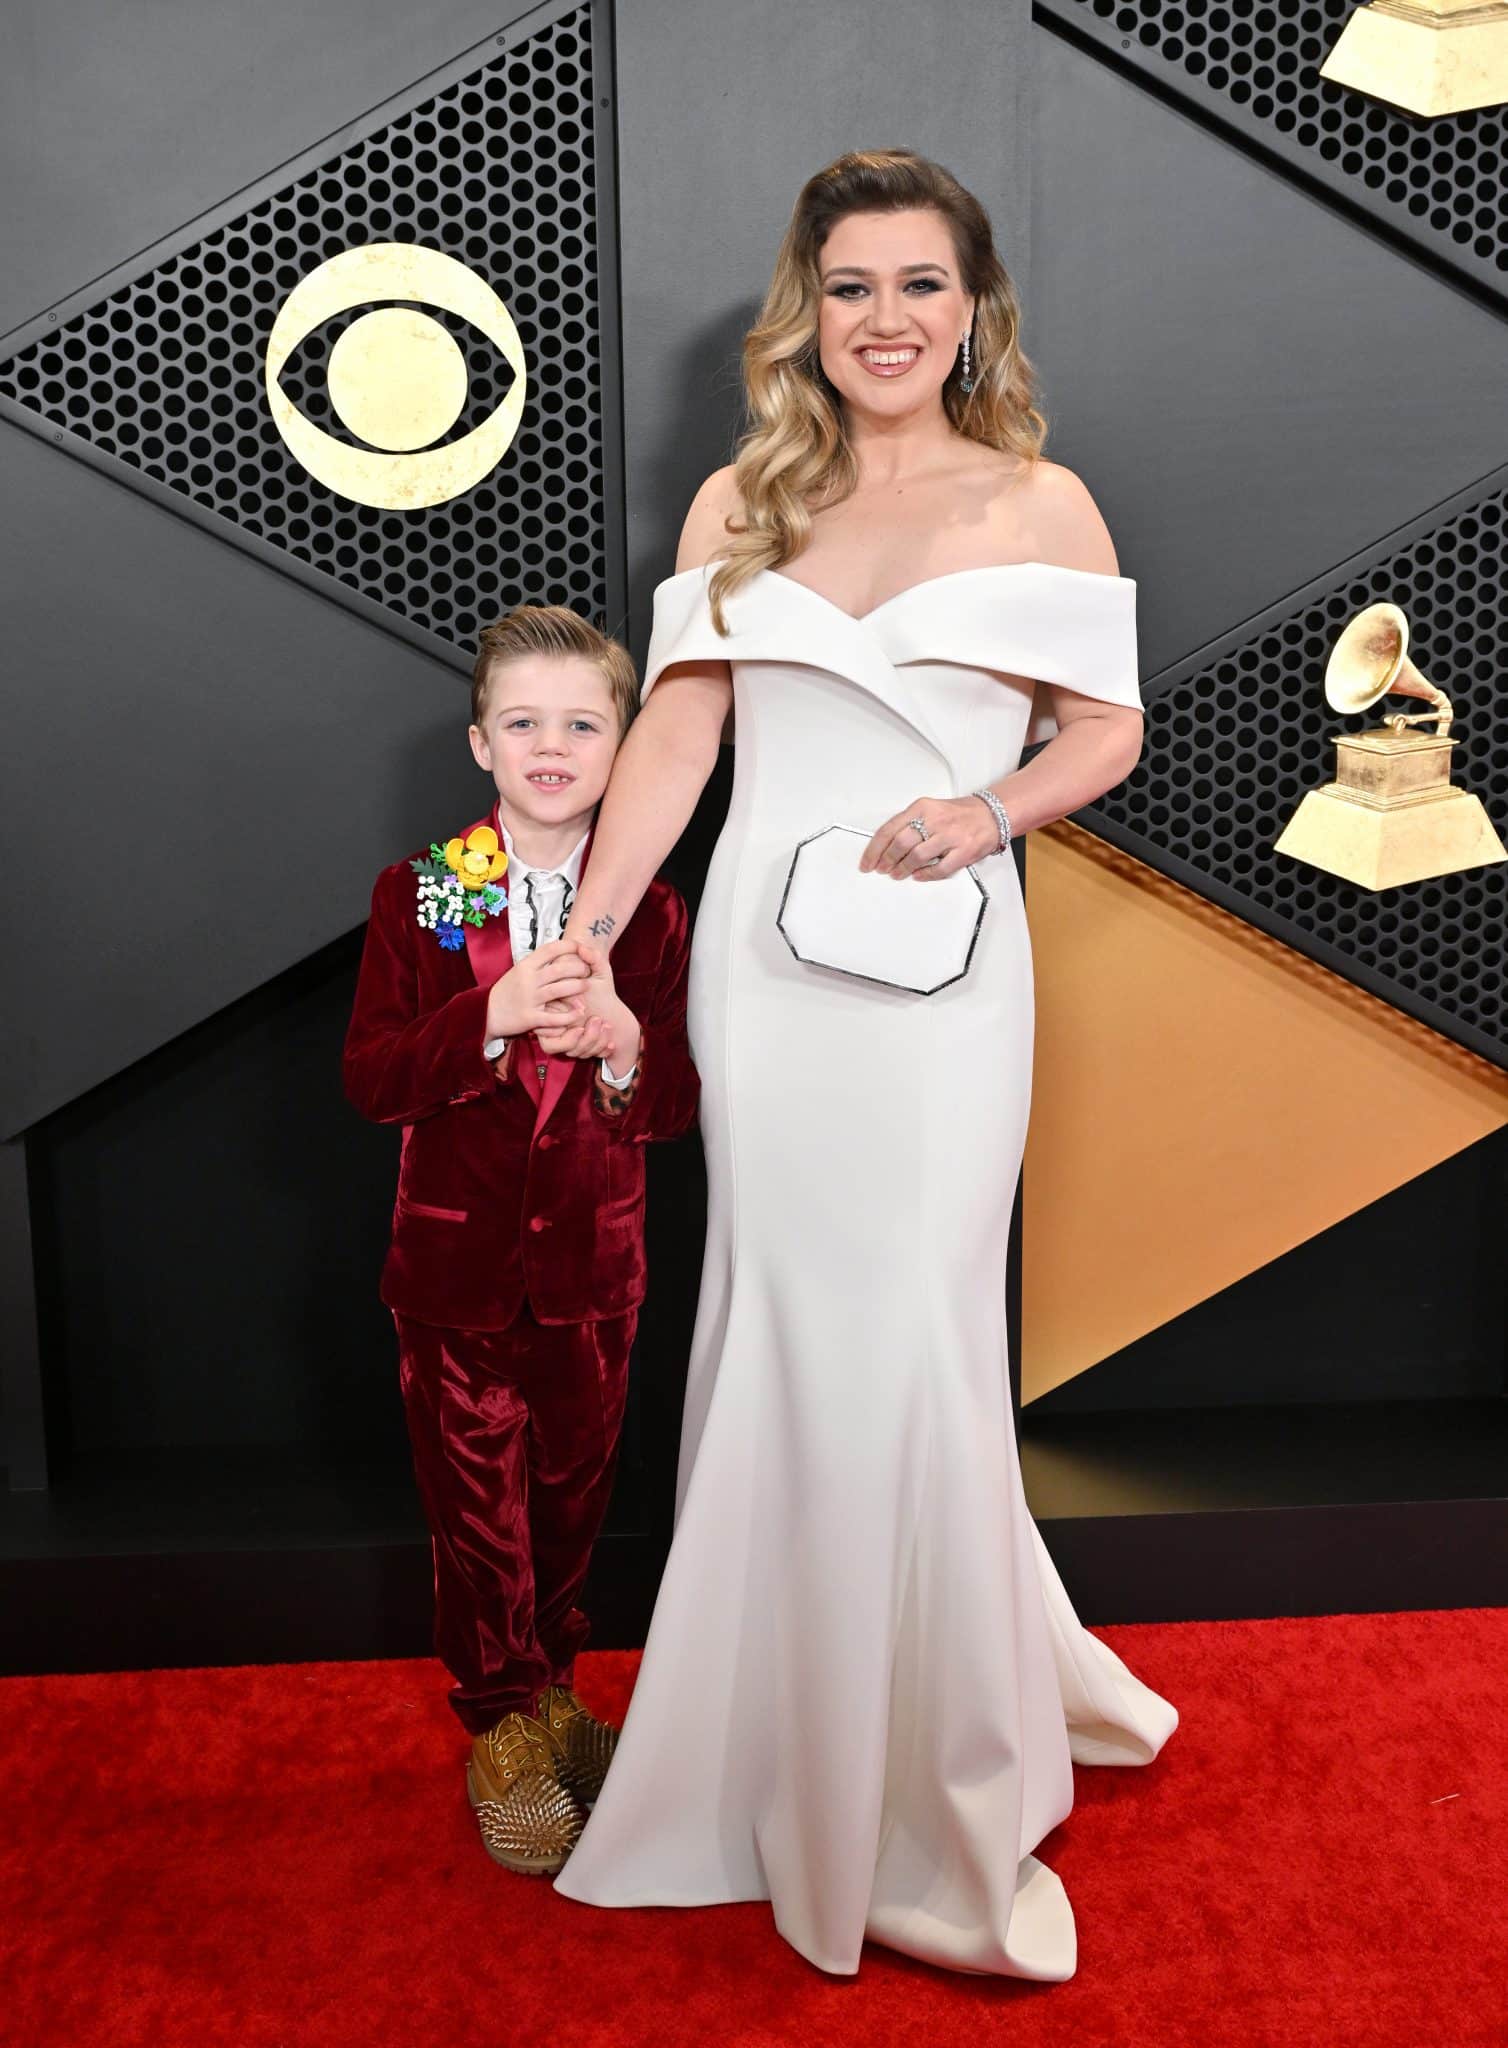 Kelly Clarkson attends the Grammys with her son Remington